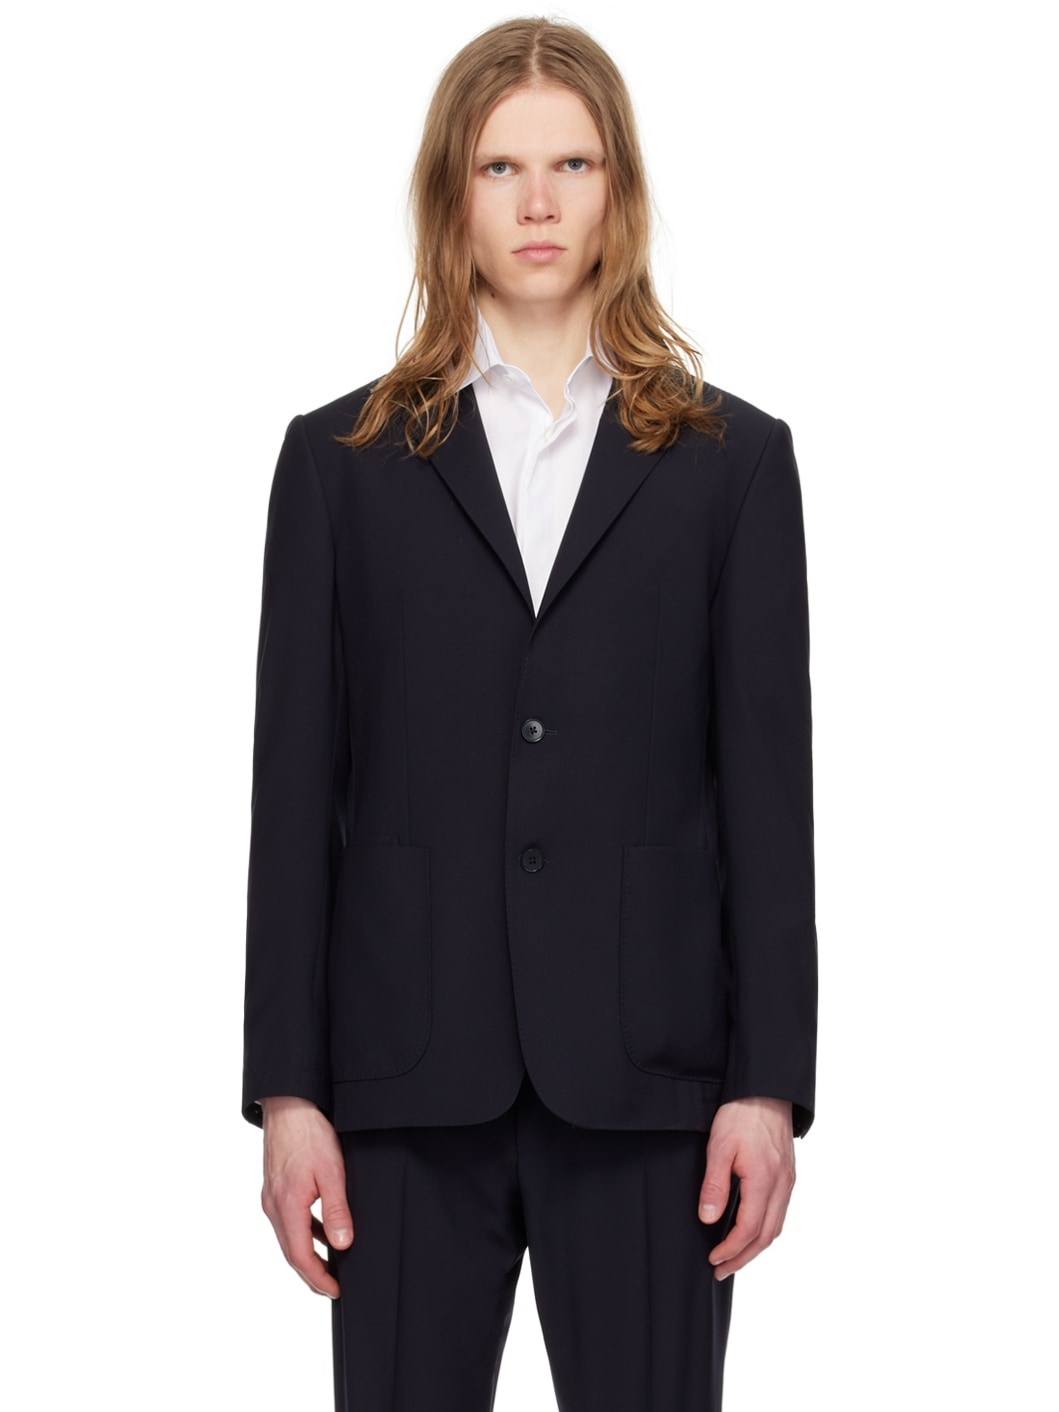 Navy Breathable Suit - 1